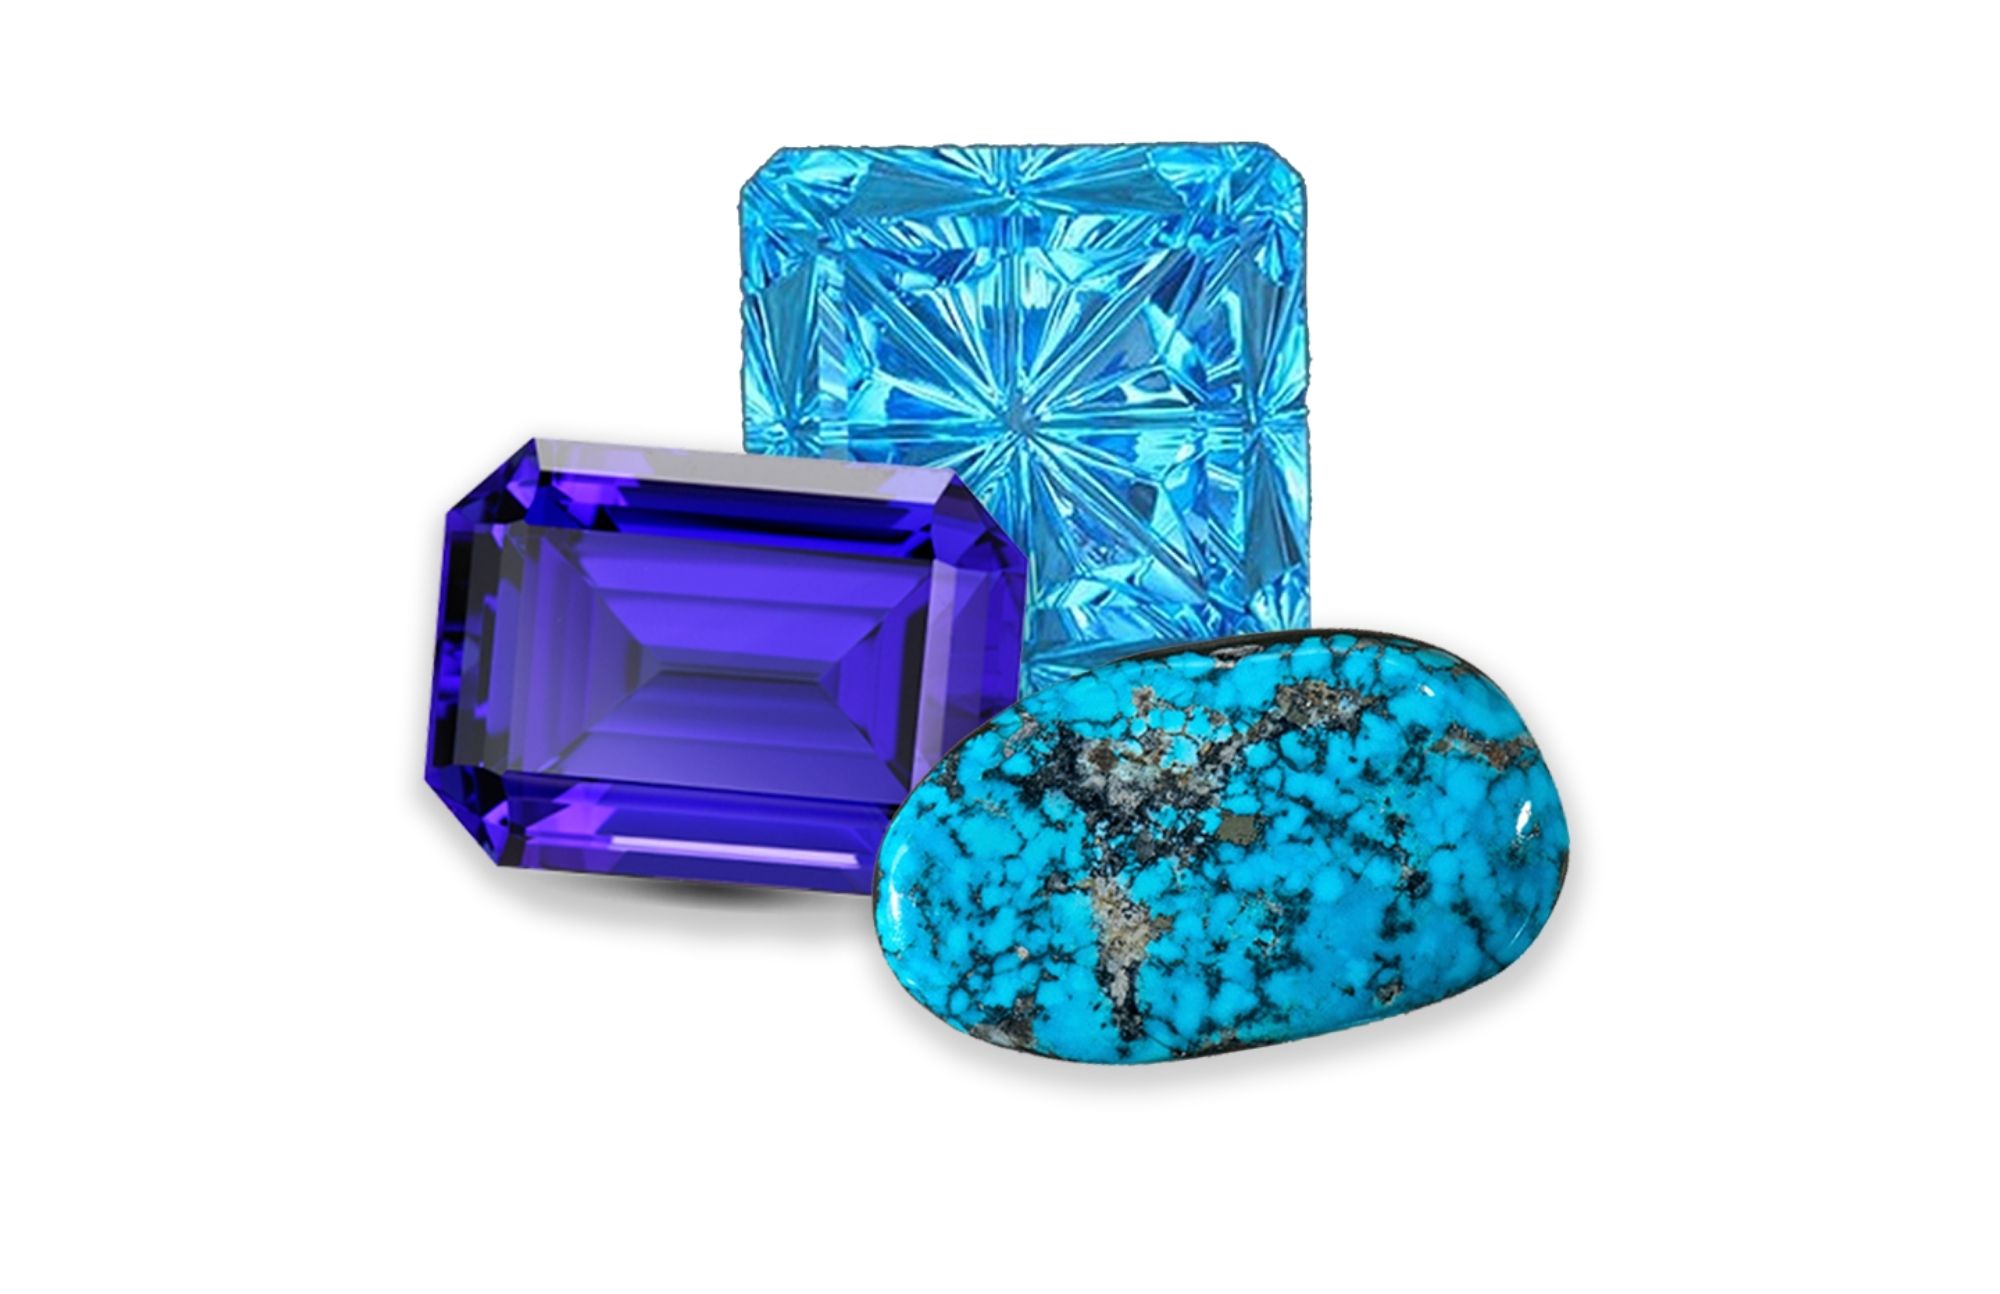 Tanzanite, Turquoise, and Zircon birthstones together on a white background